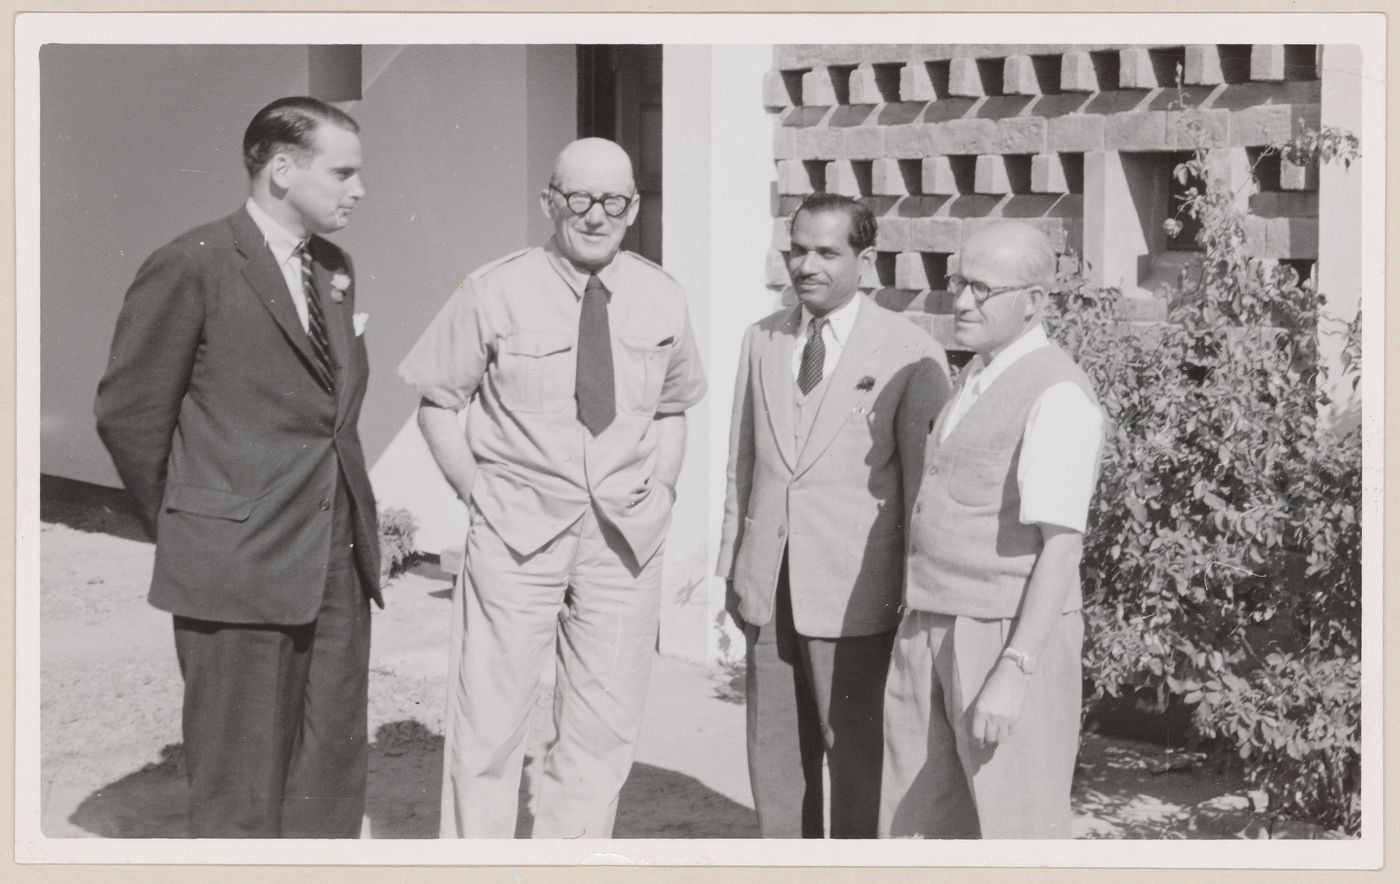 Parkin, Le Corbusier, Pierre Jeanneret and their colleague in India, probably in Chandigarh